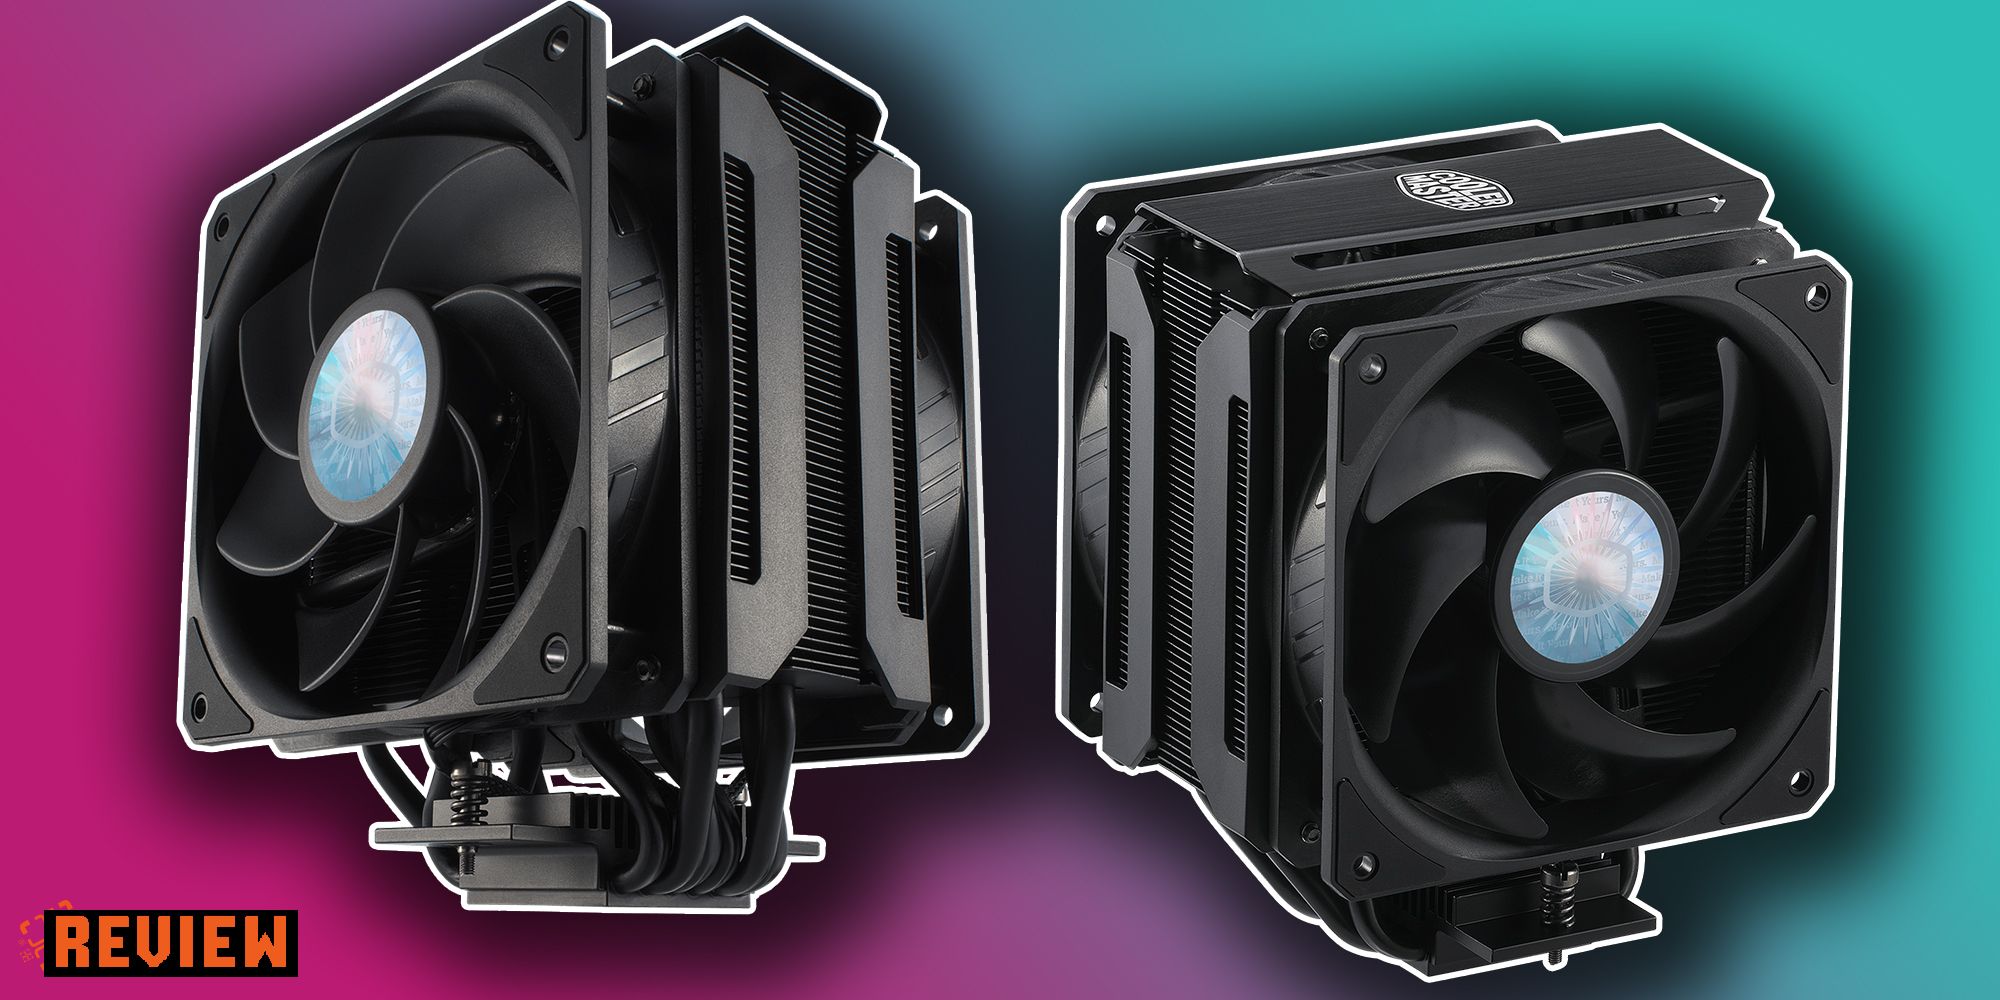 Product image for Cooler Master MA612 Stealth.